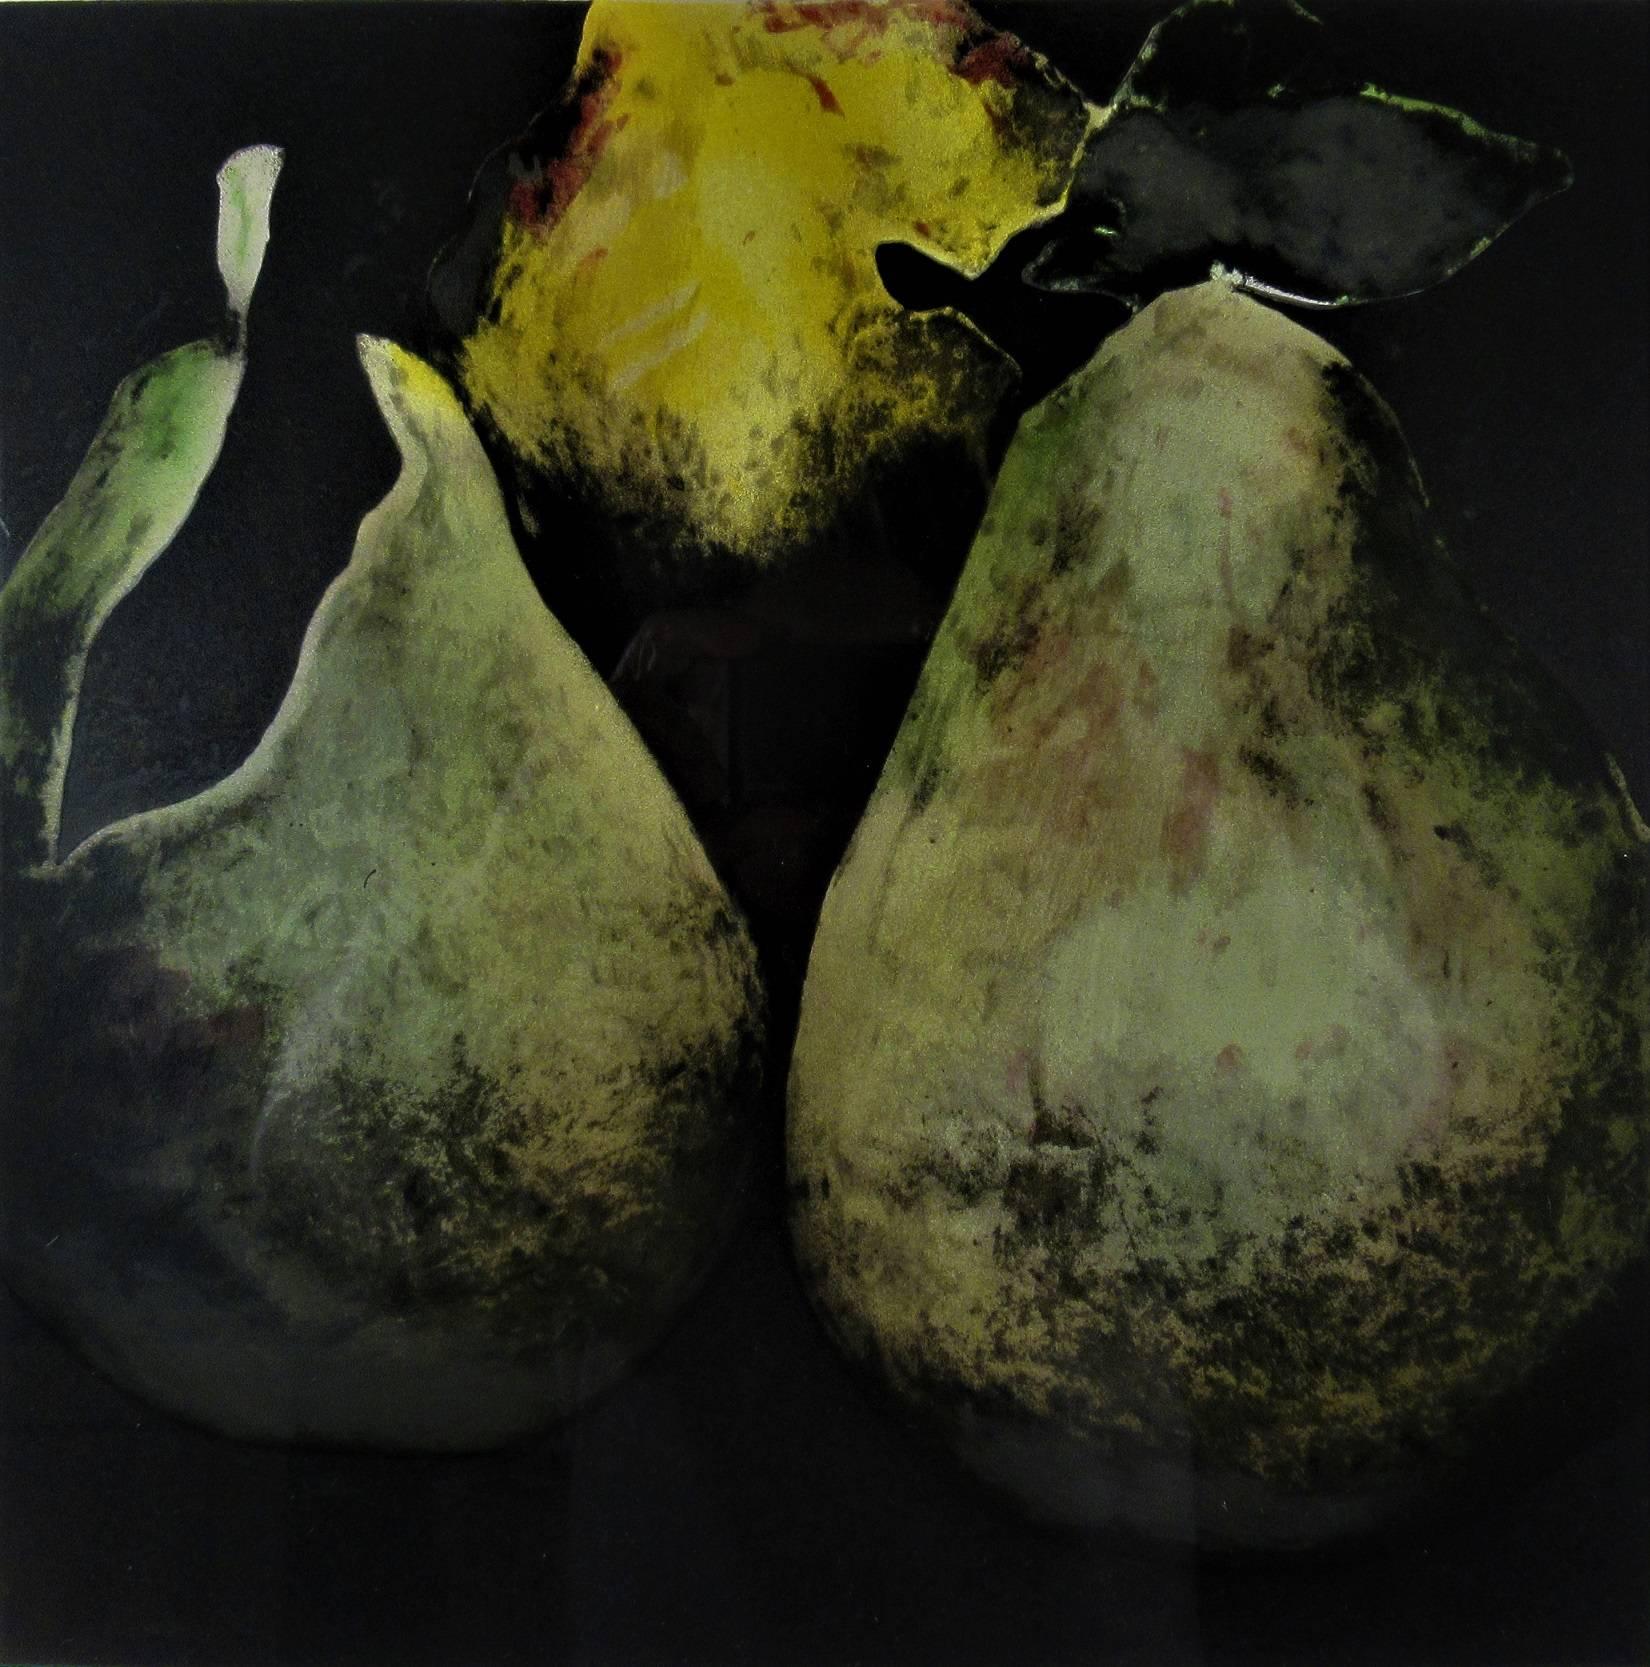 Pears - Print by Donald Sultan